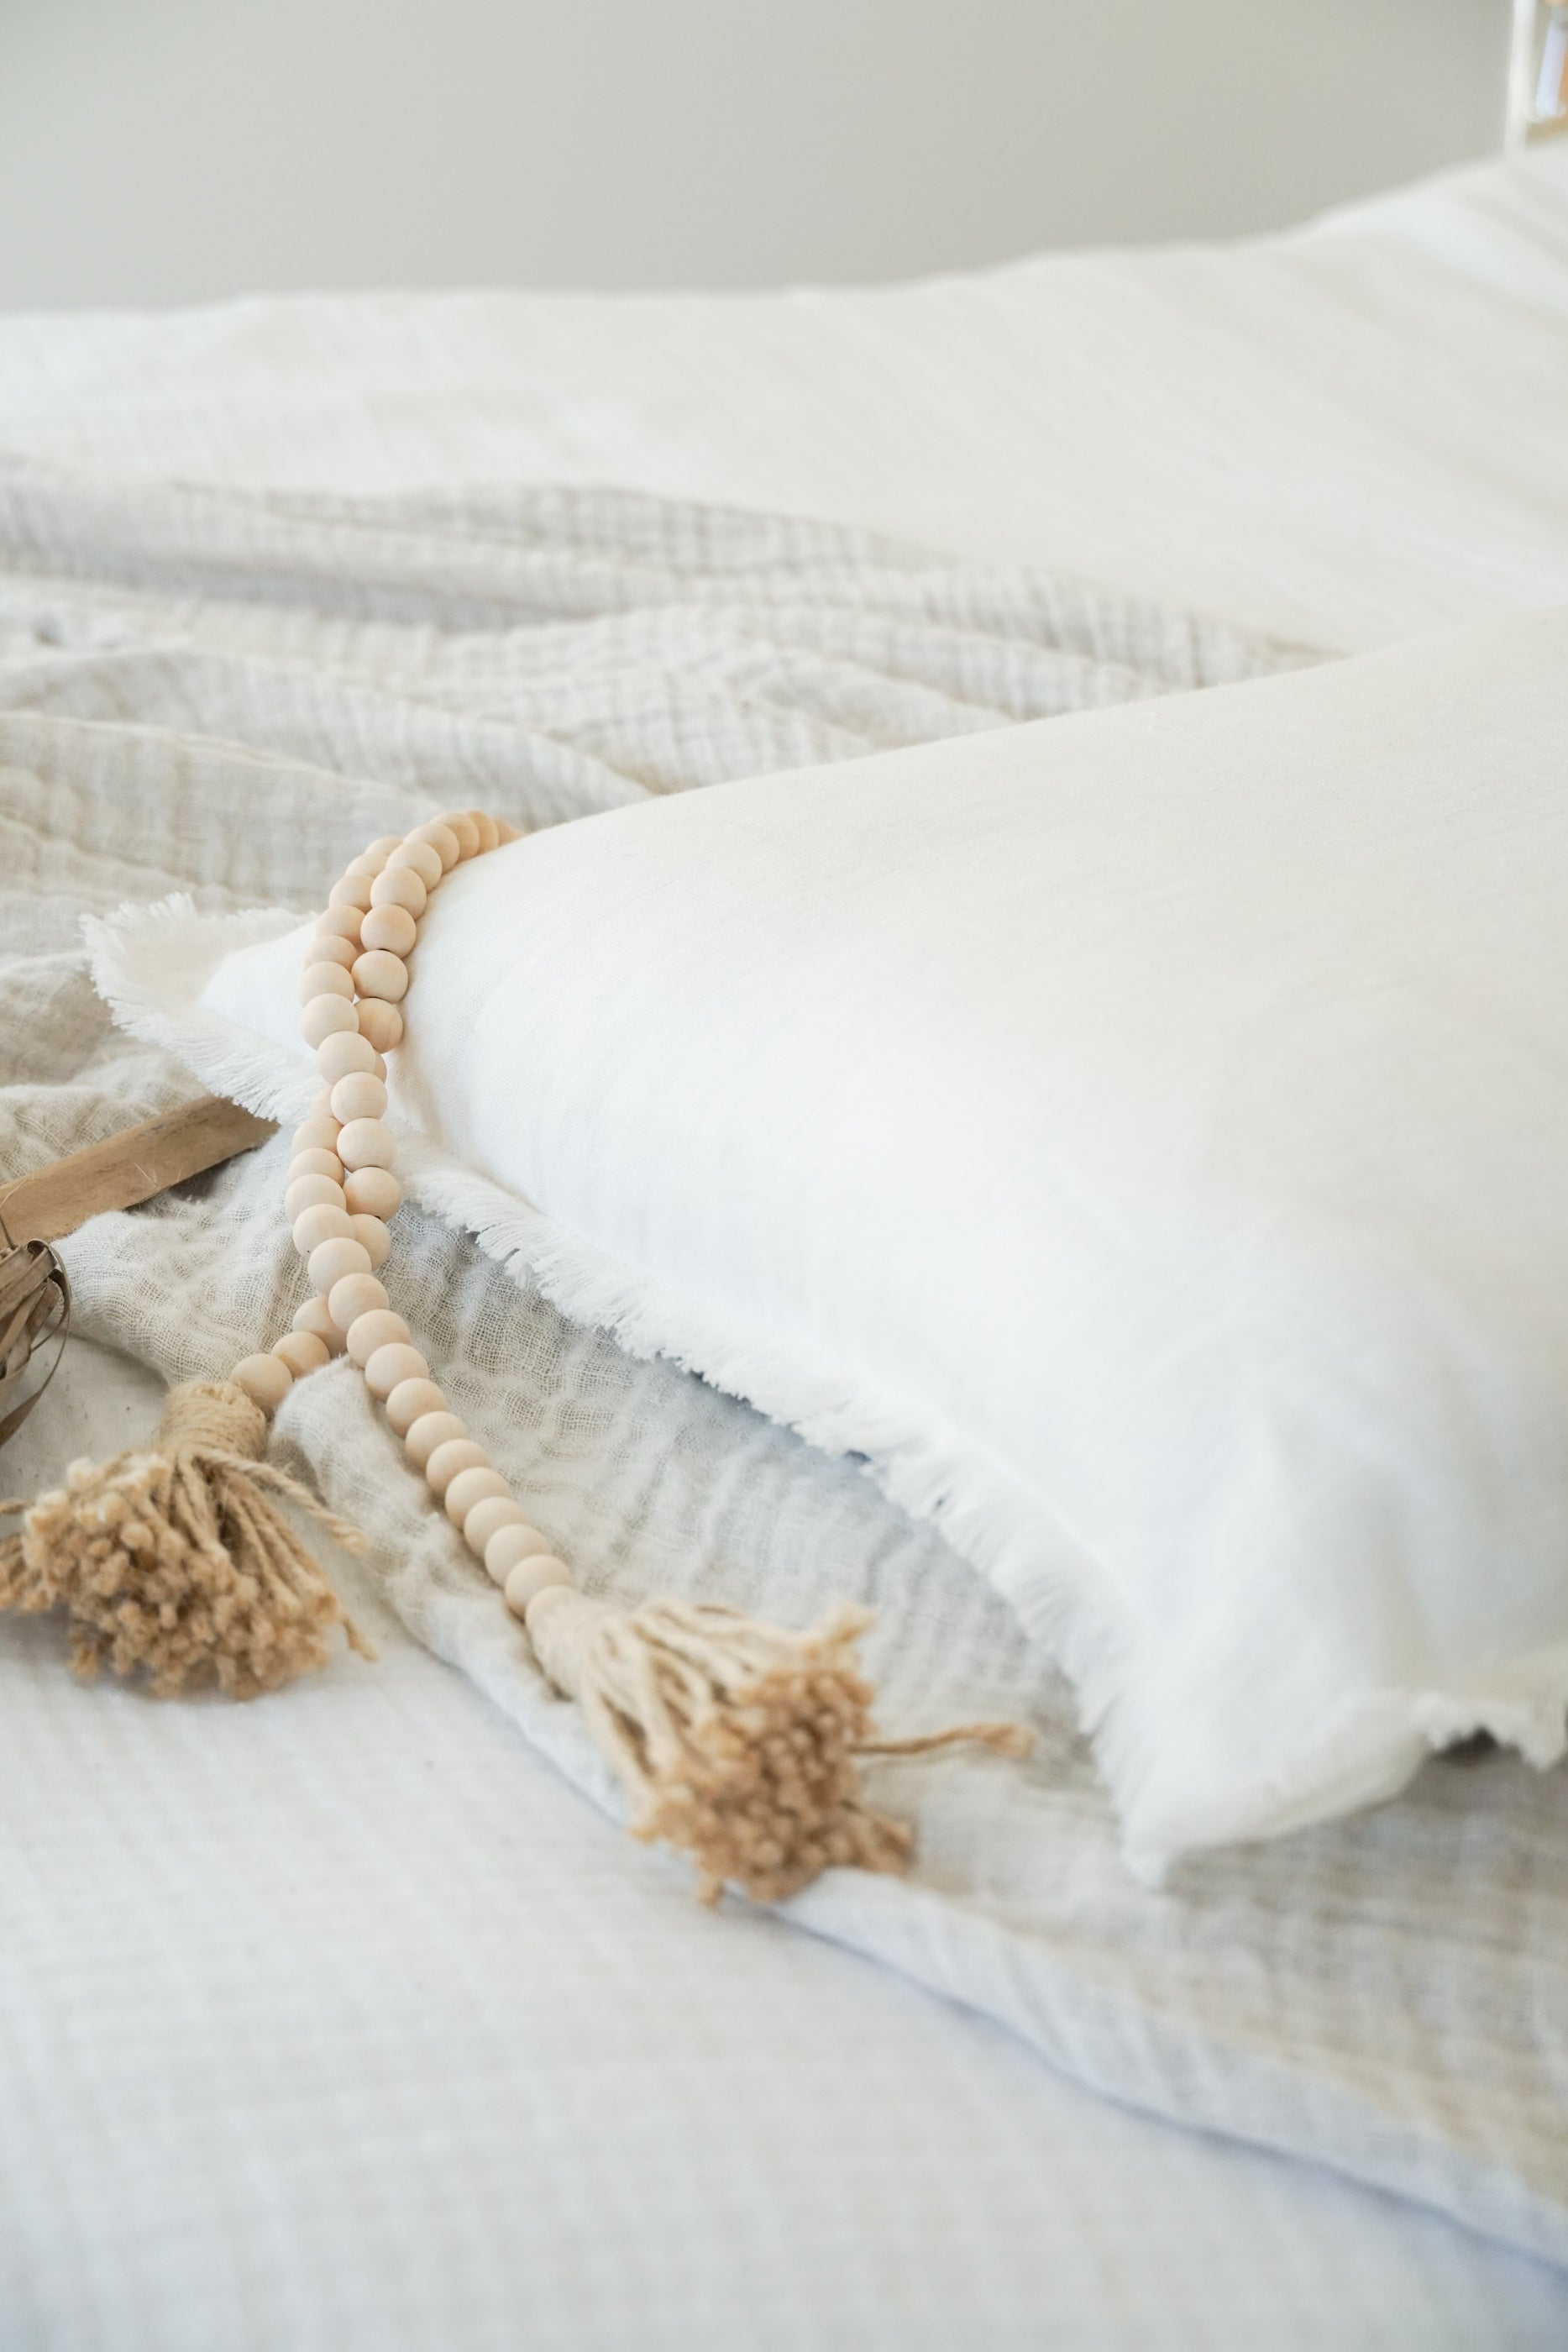 Buy White So Soft Linen Pillows by Anaya